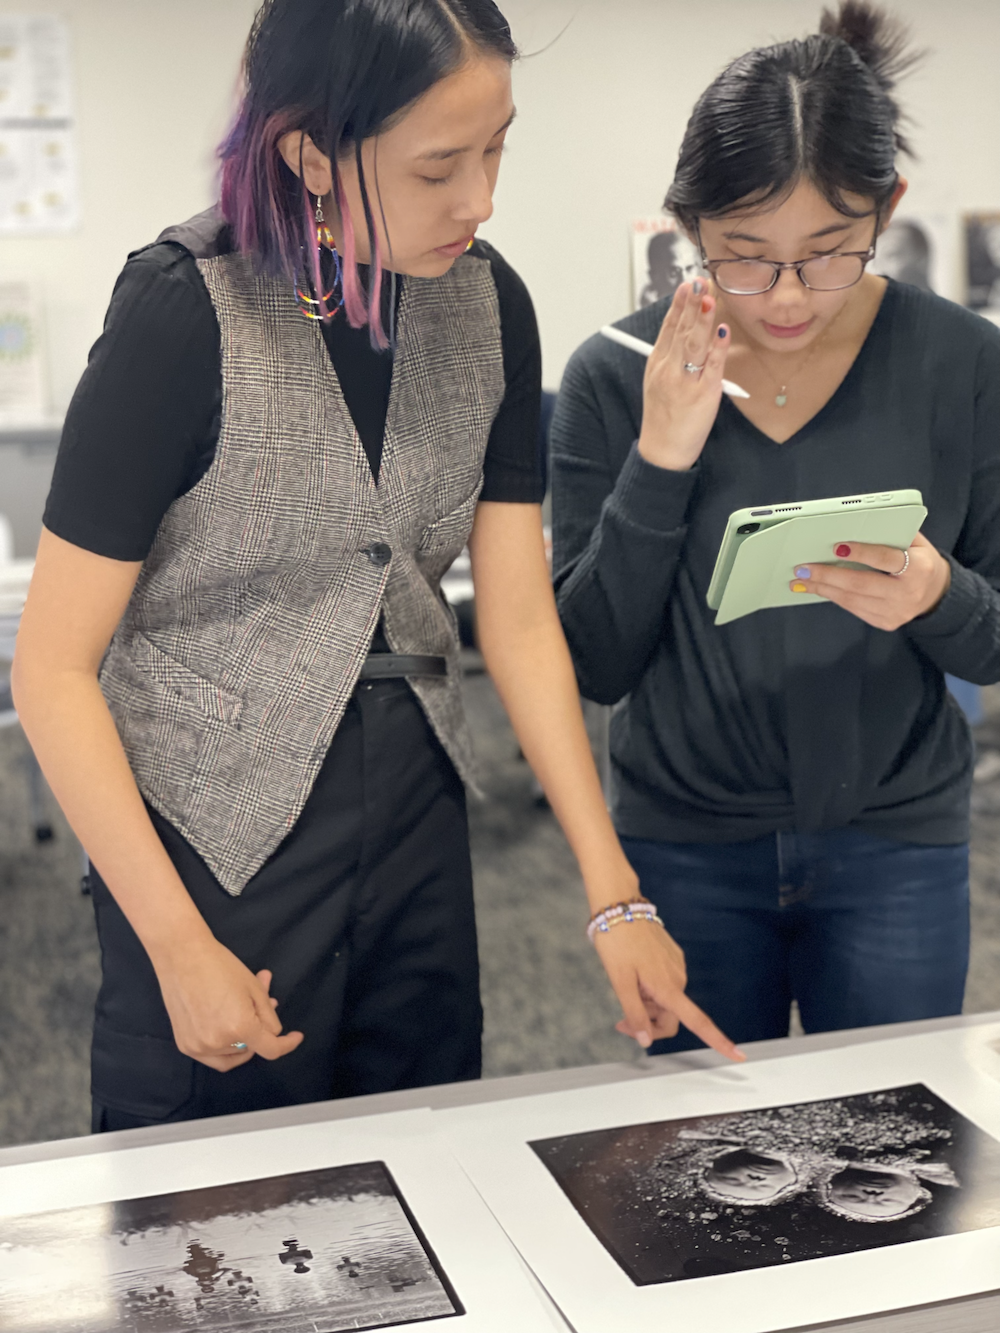 Two students looking at photo